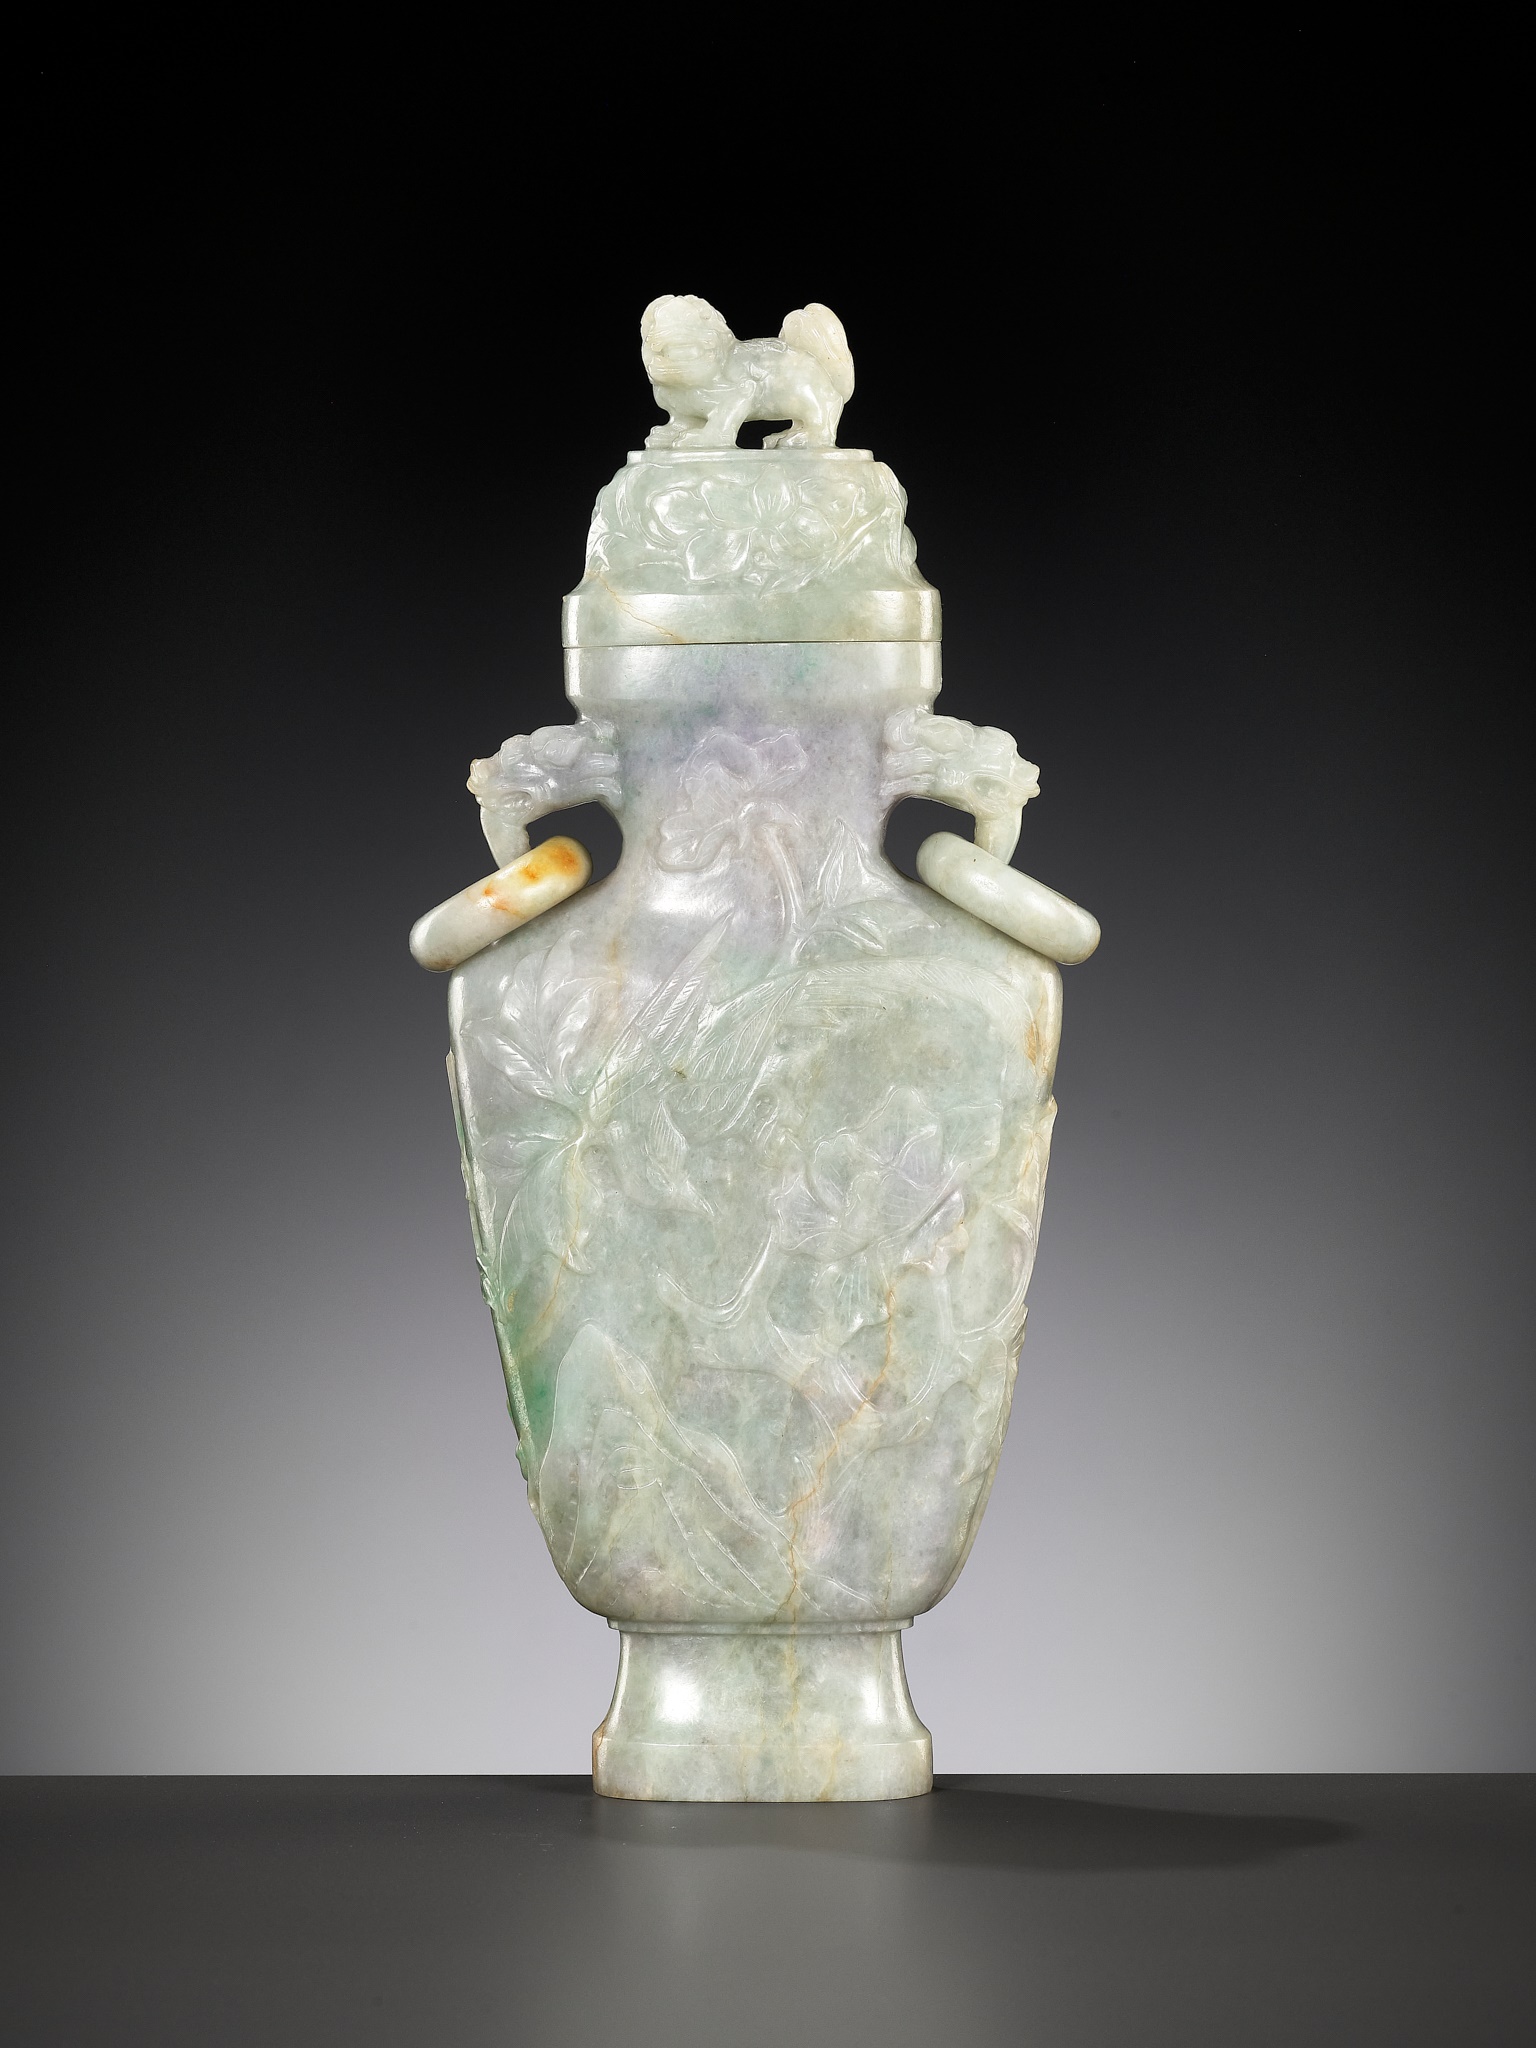 A JADEITE BALUSTER VASE AND COVER, LATE QING DYNASTY TO REPUBLIC PERIOD - Image 7 of 12